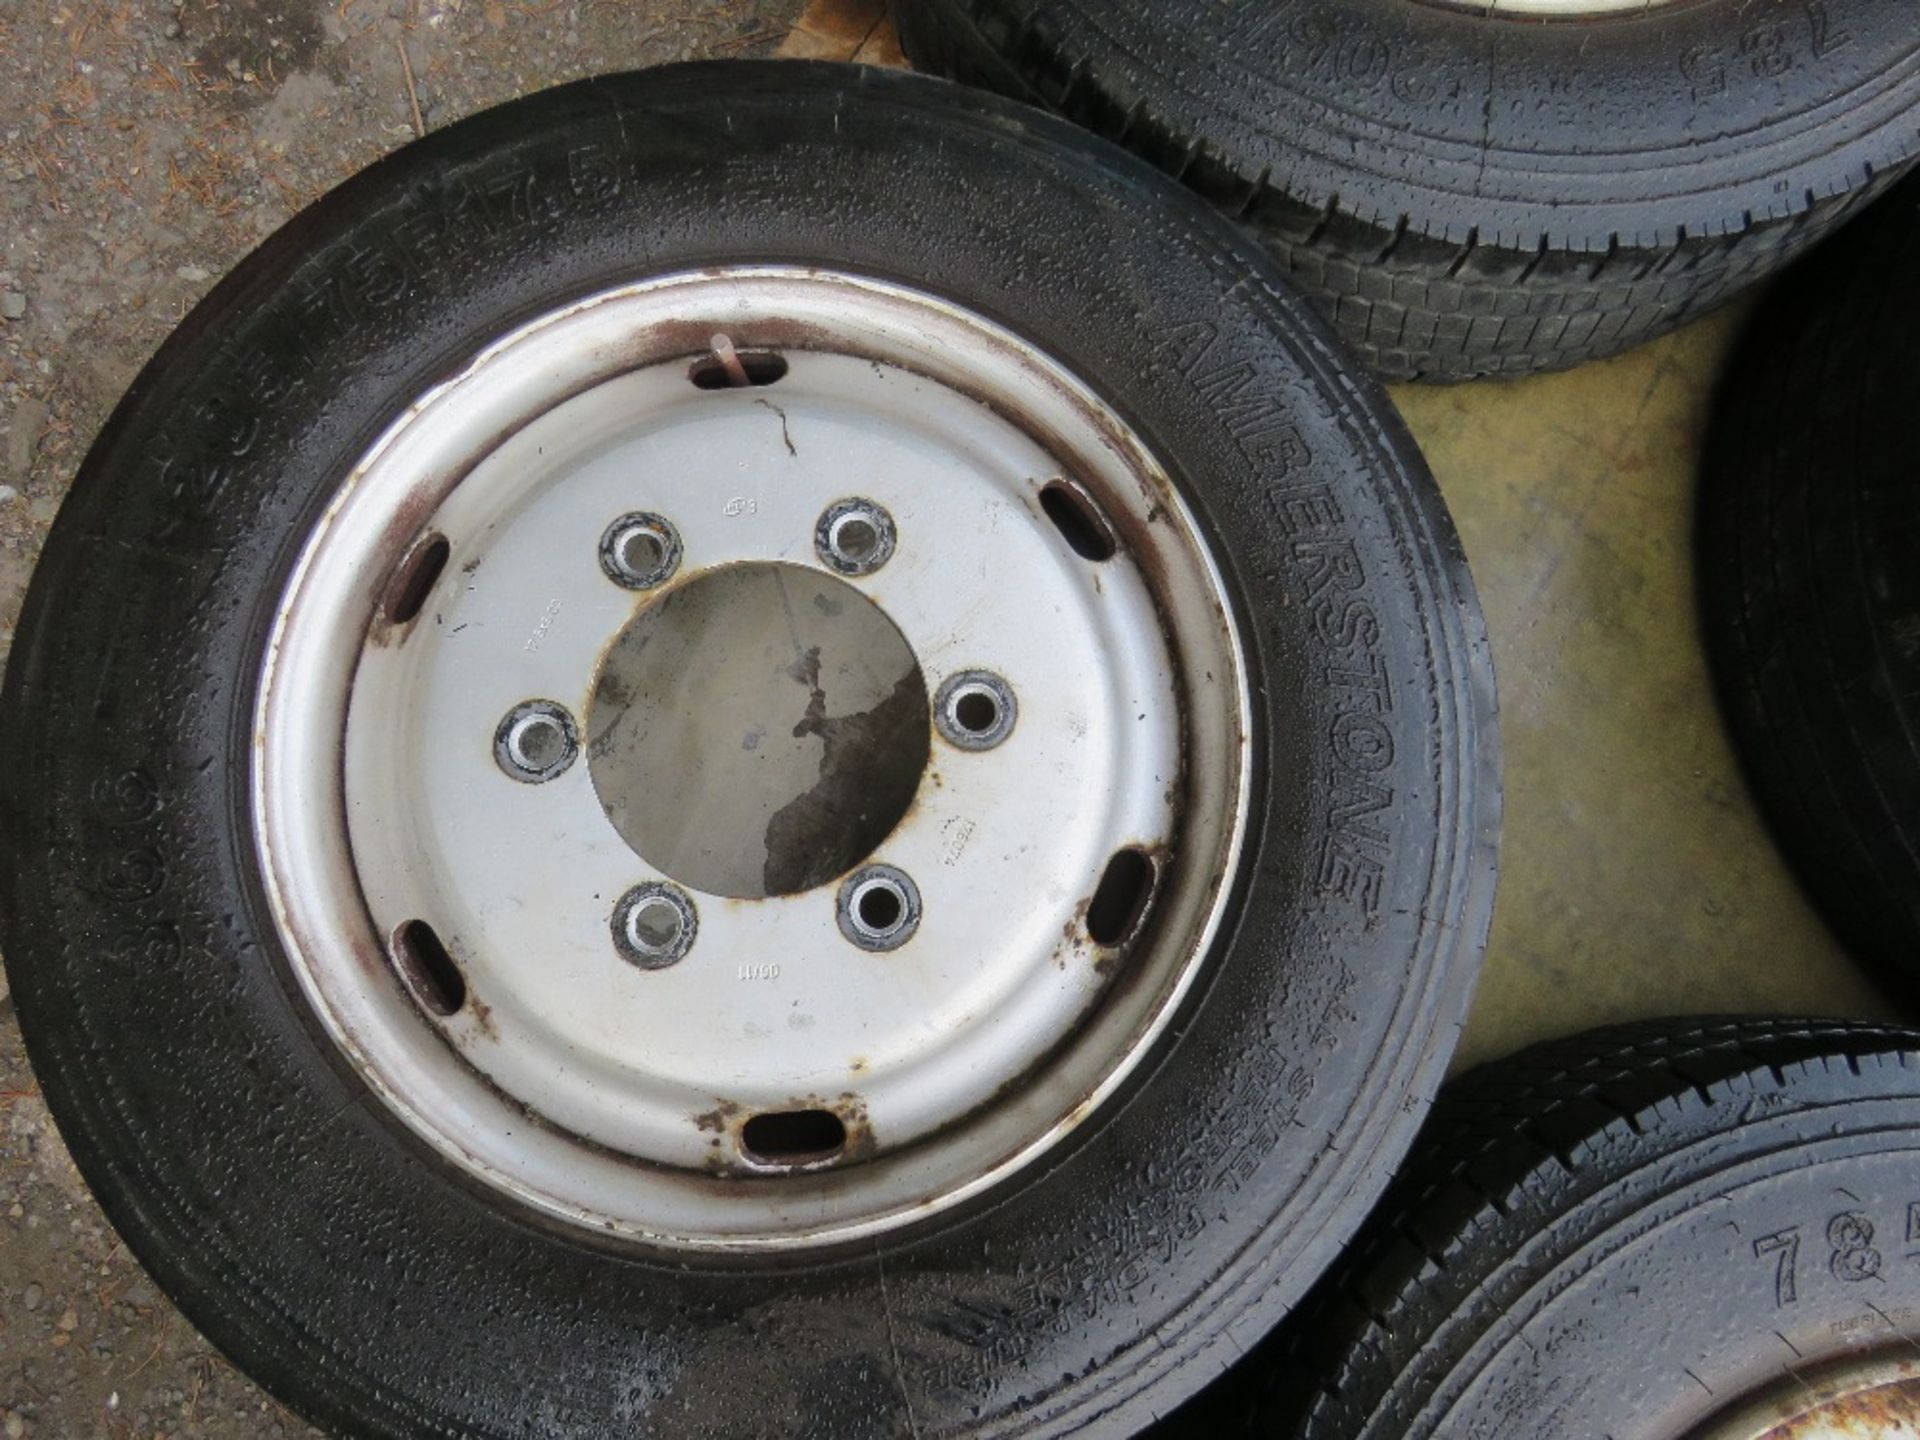 4 X 6 STUD WHEELS AND TYRES, 205/75R17.5 SIZE TYRES. NO VAT ON HAMMER PRICE. - Image 3 of 3